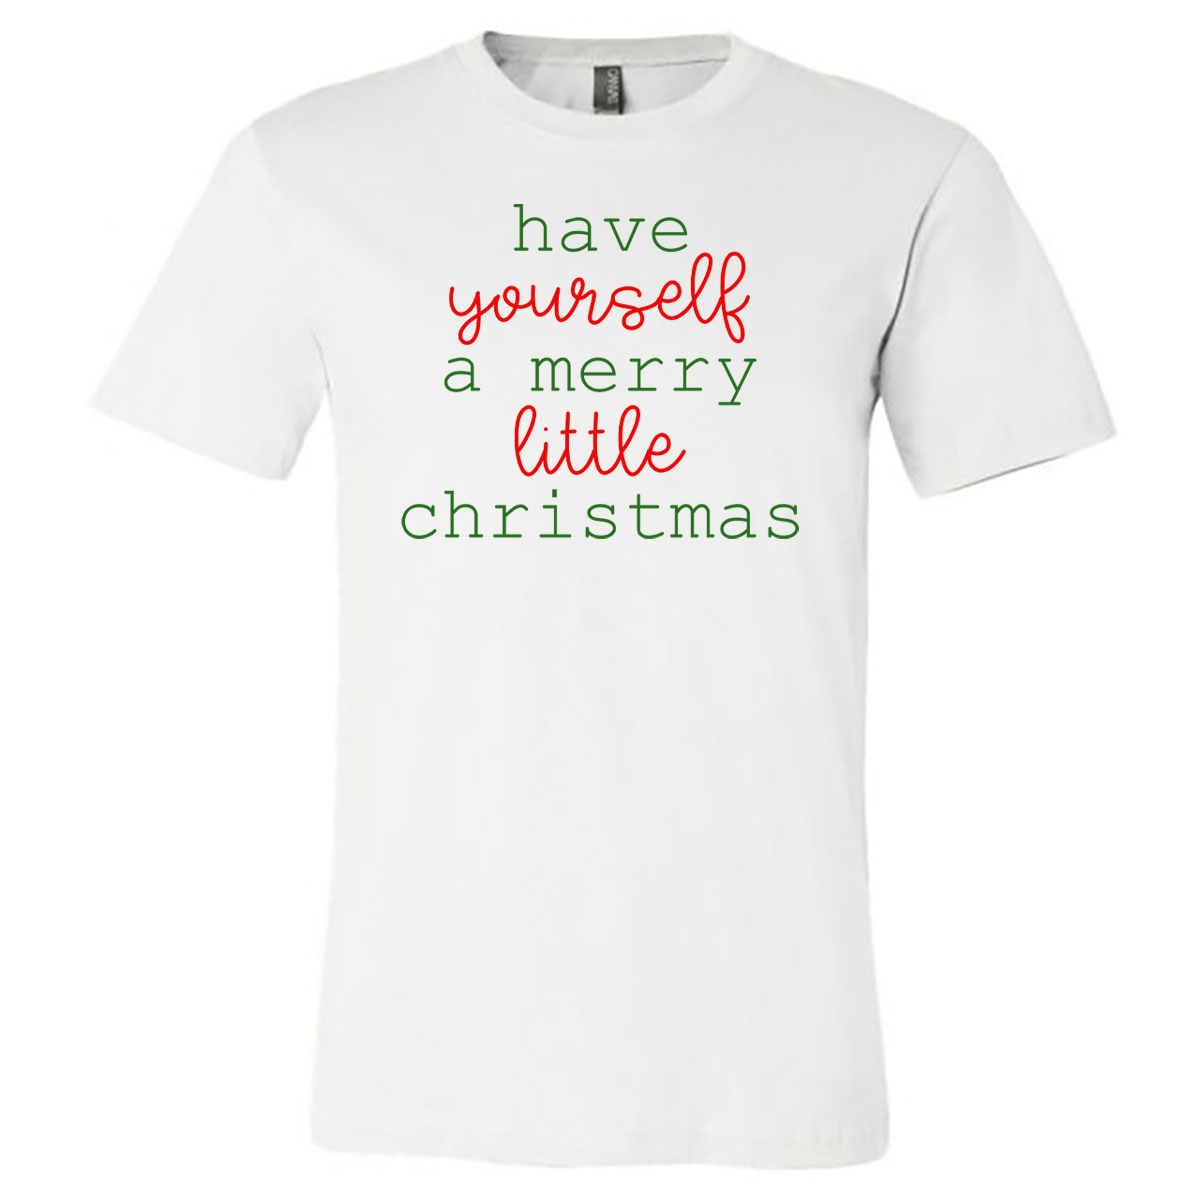 Have Yourself a Merry Little Christmas Tee - White - Southern Grace Creations